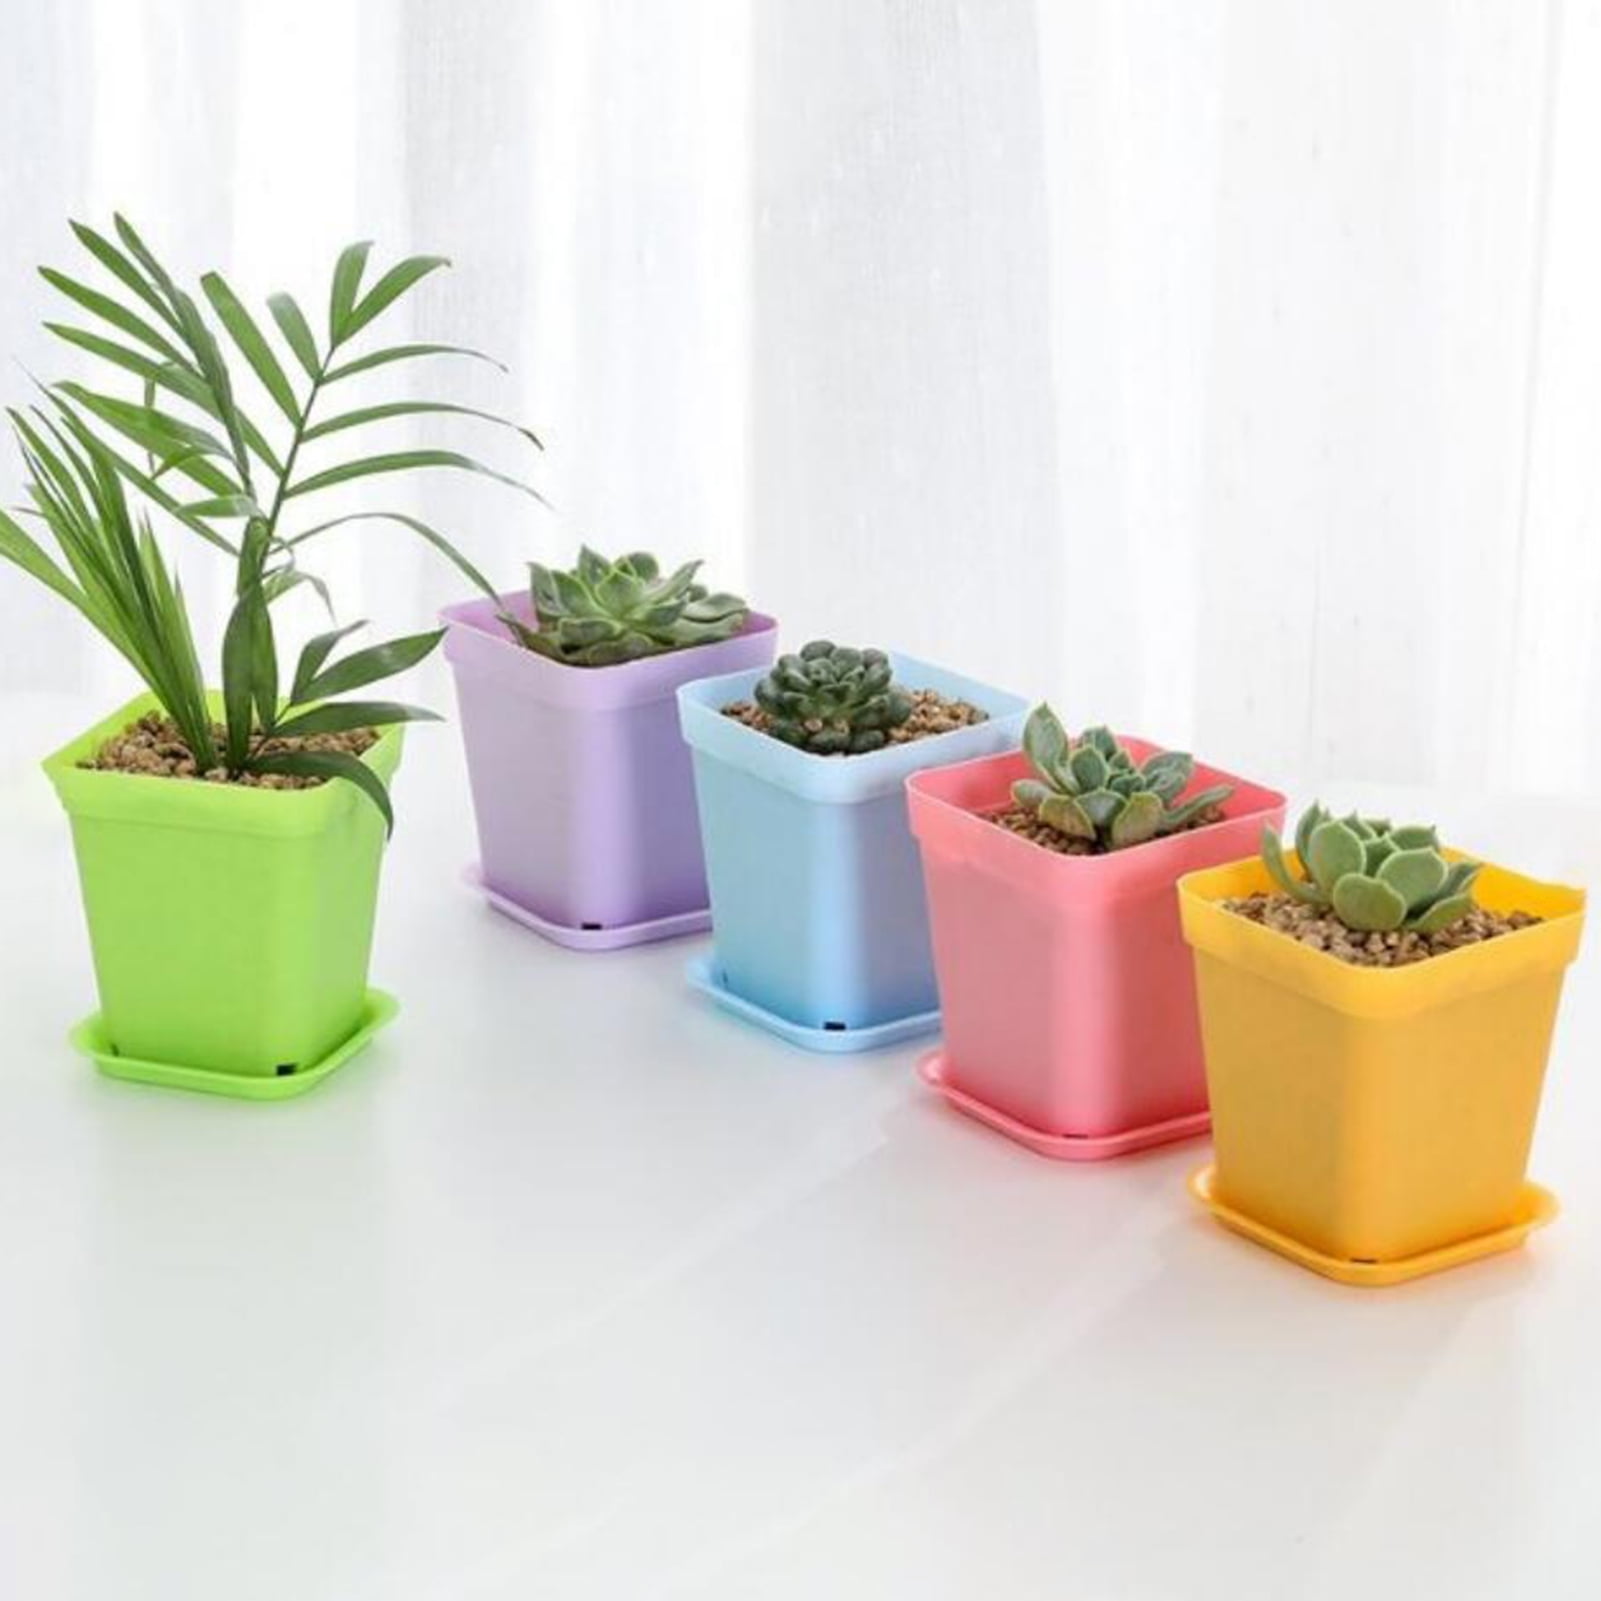 seedlings cuttings Pack of 5 brand new 7cm square plastic plant pots potting 